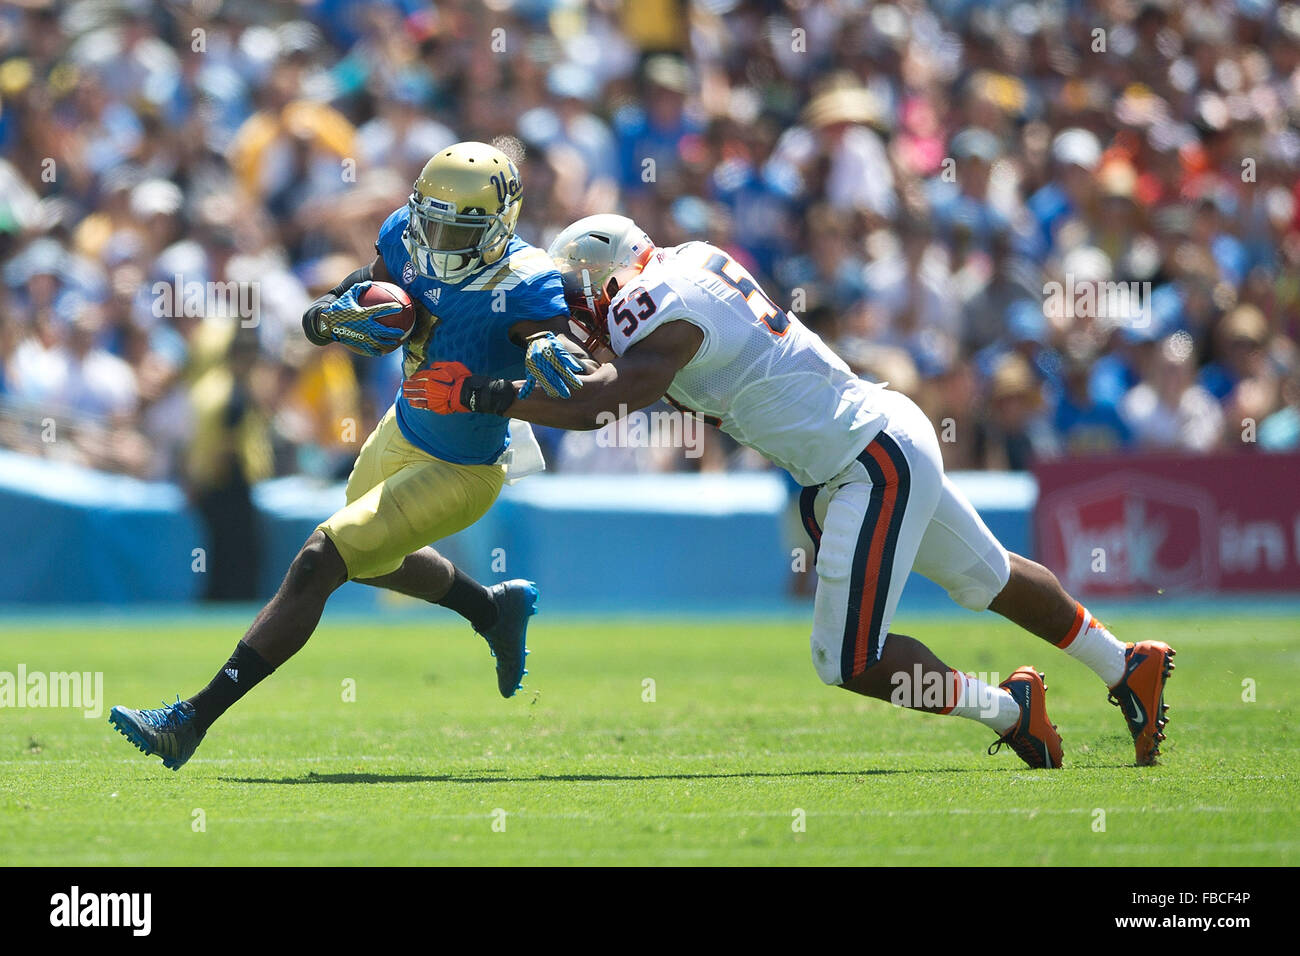 Wide receiver Devin Fuller #7 of the UCLA Bruins is tackled by linebacker Micah Kiser #53 of the Virginia Cavaliers during the Stock Photo